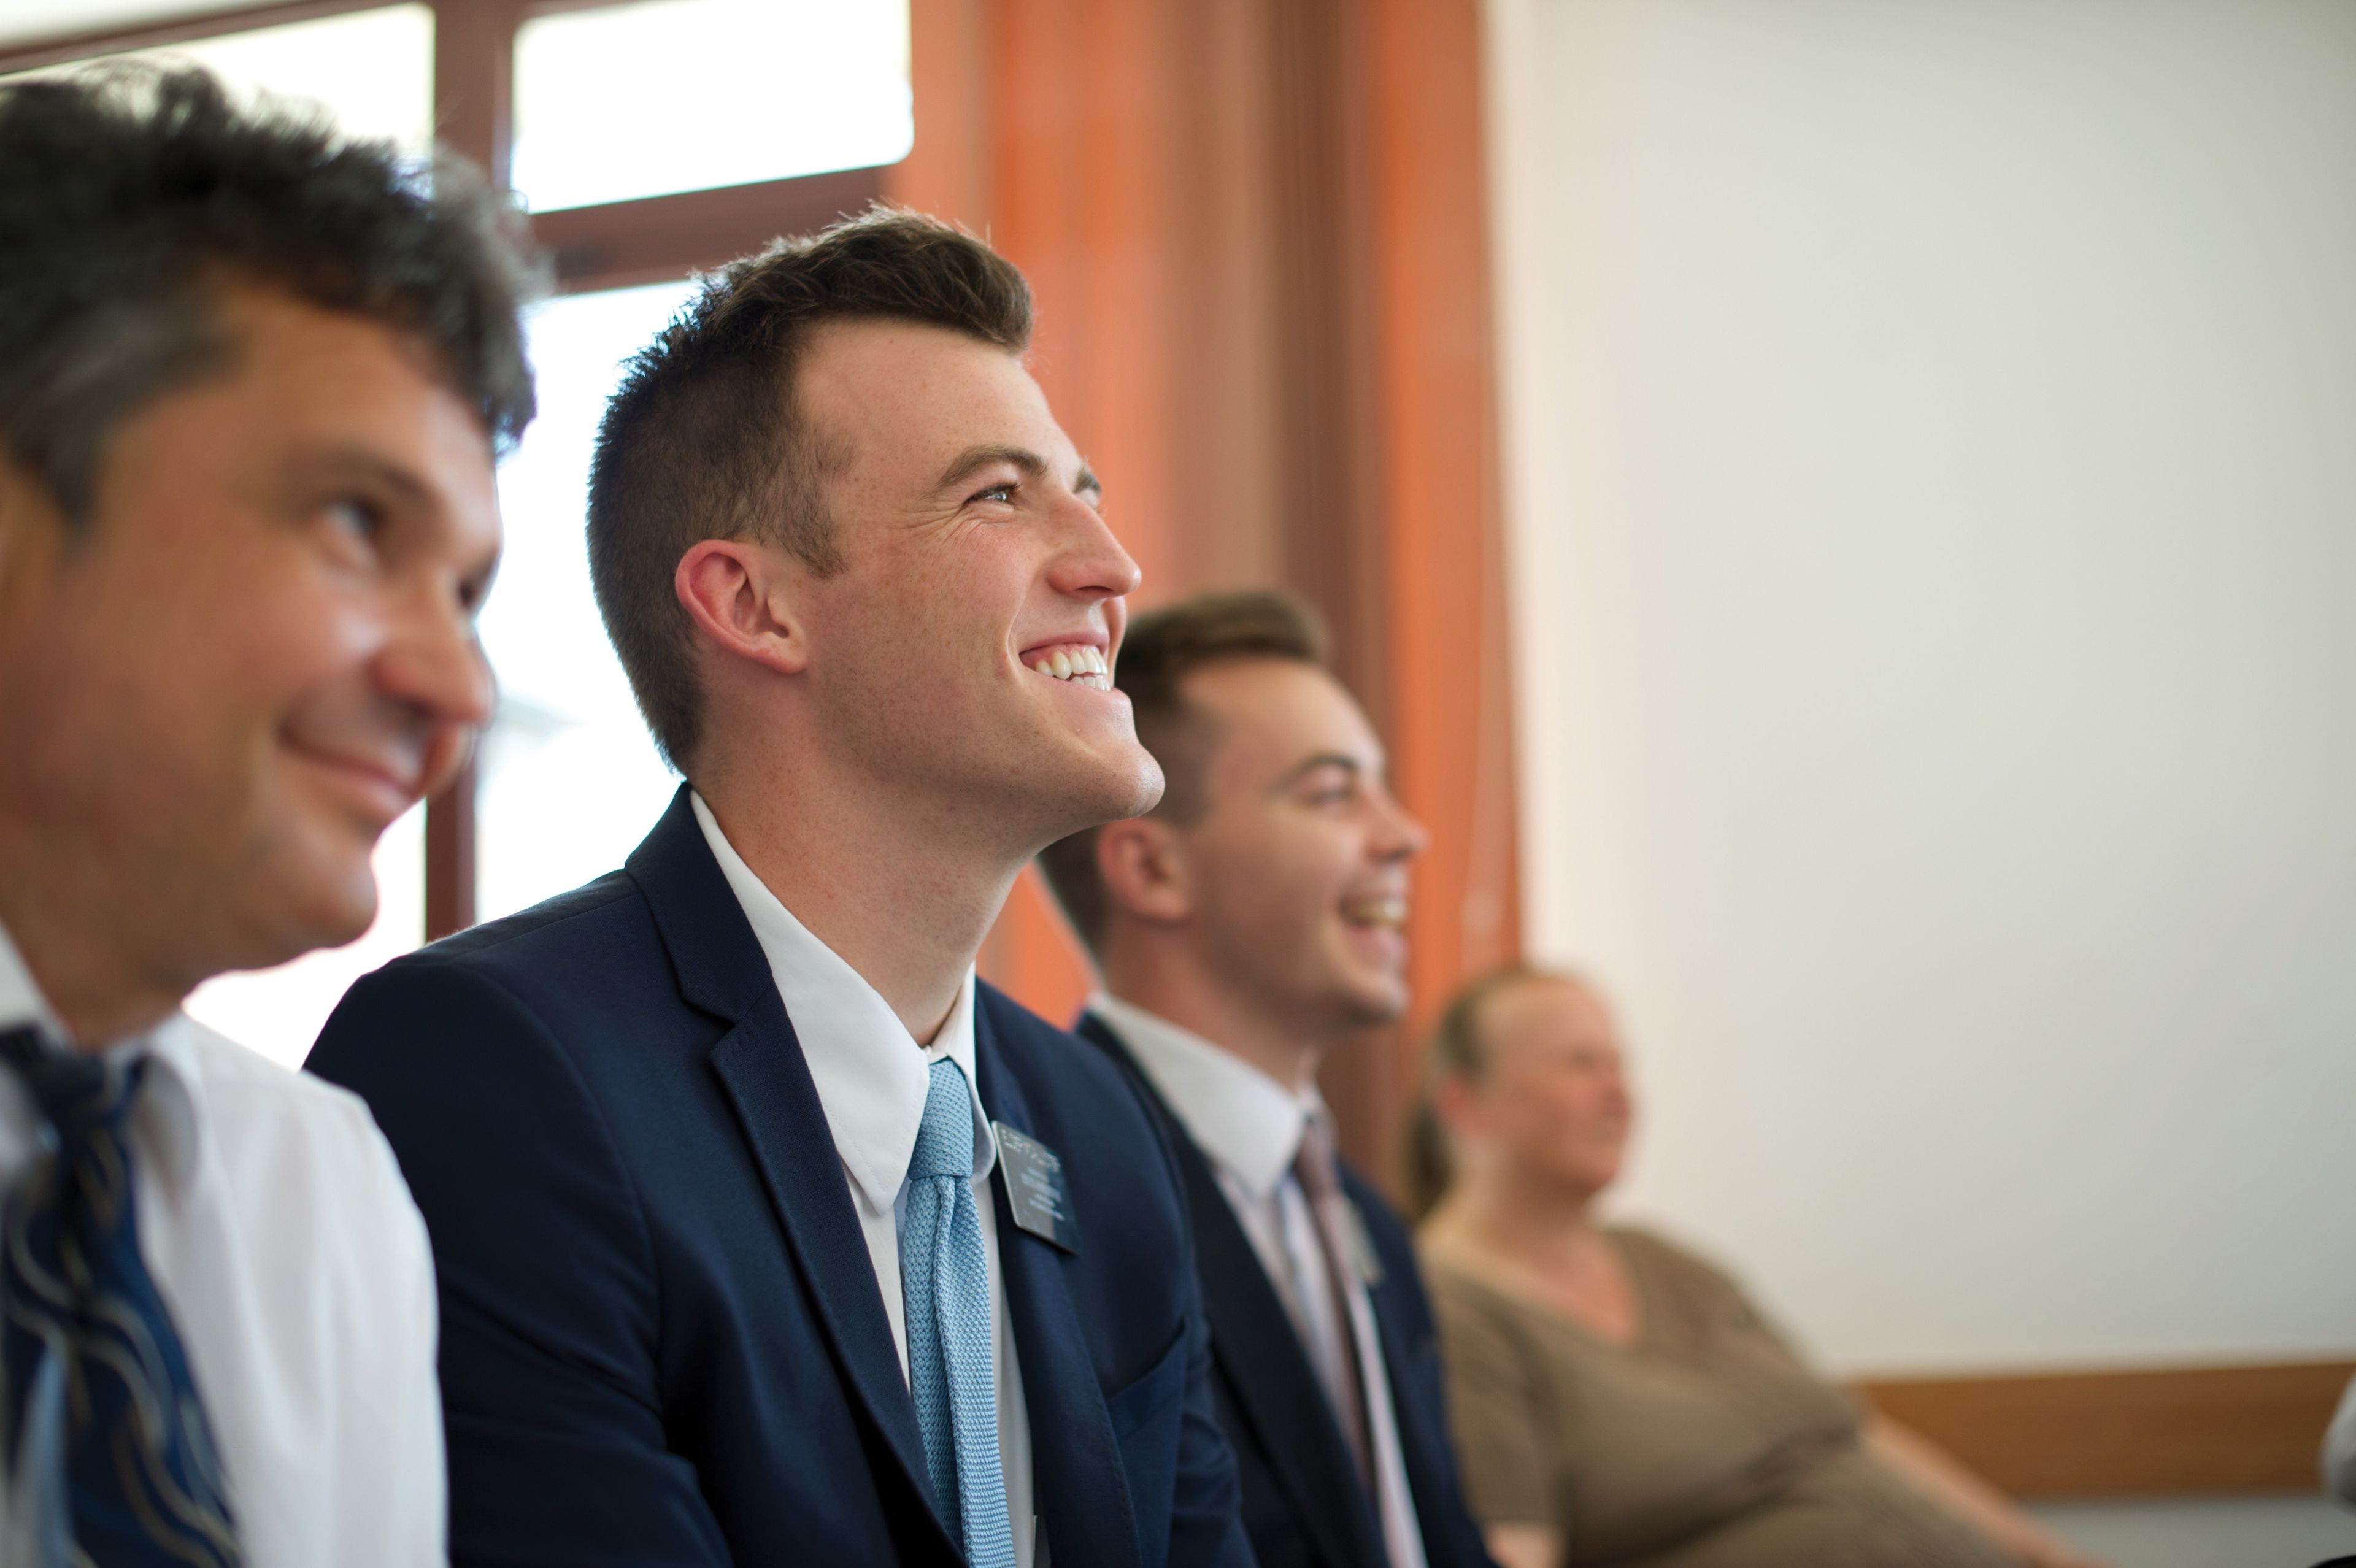 Elder missionaries smiling during a Church meeting.